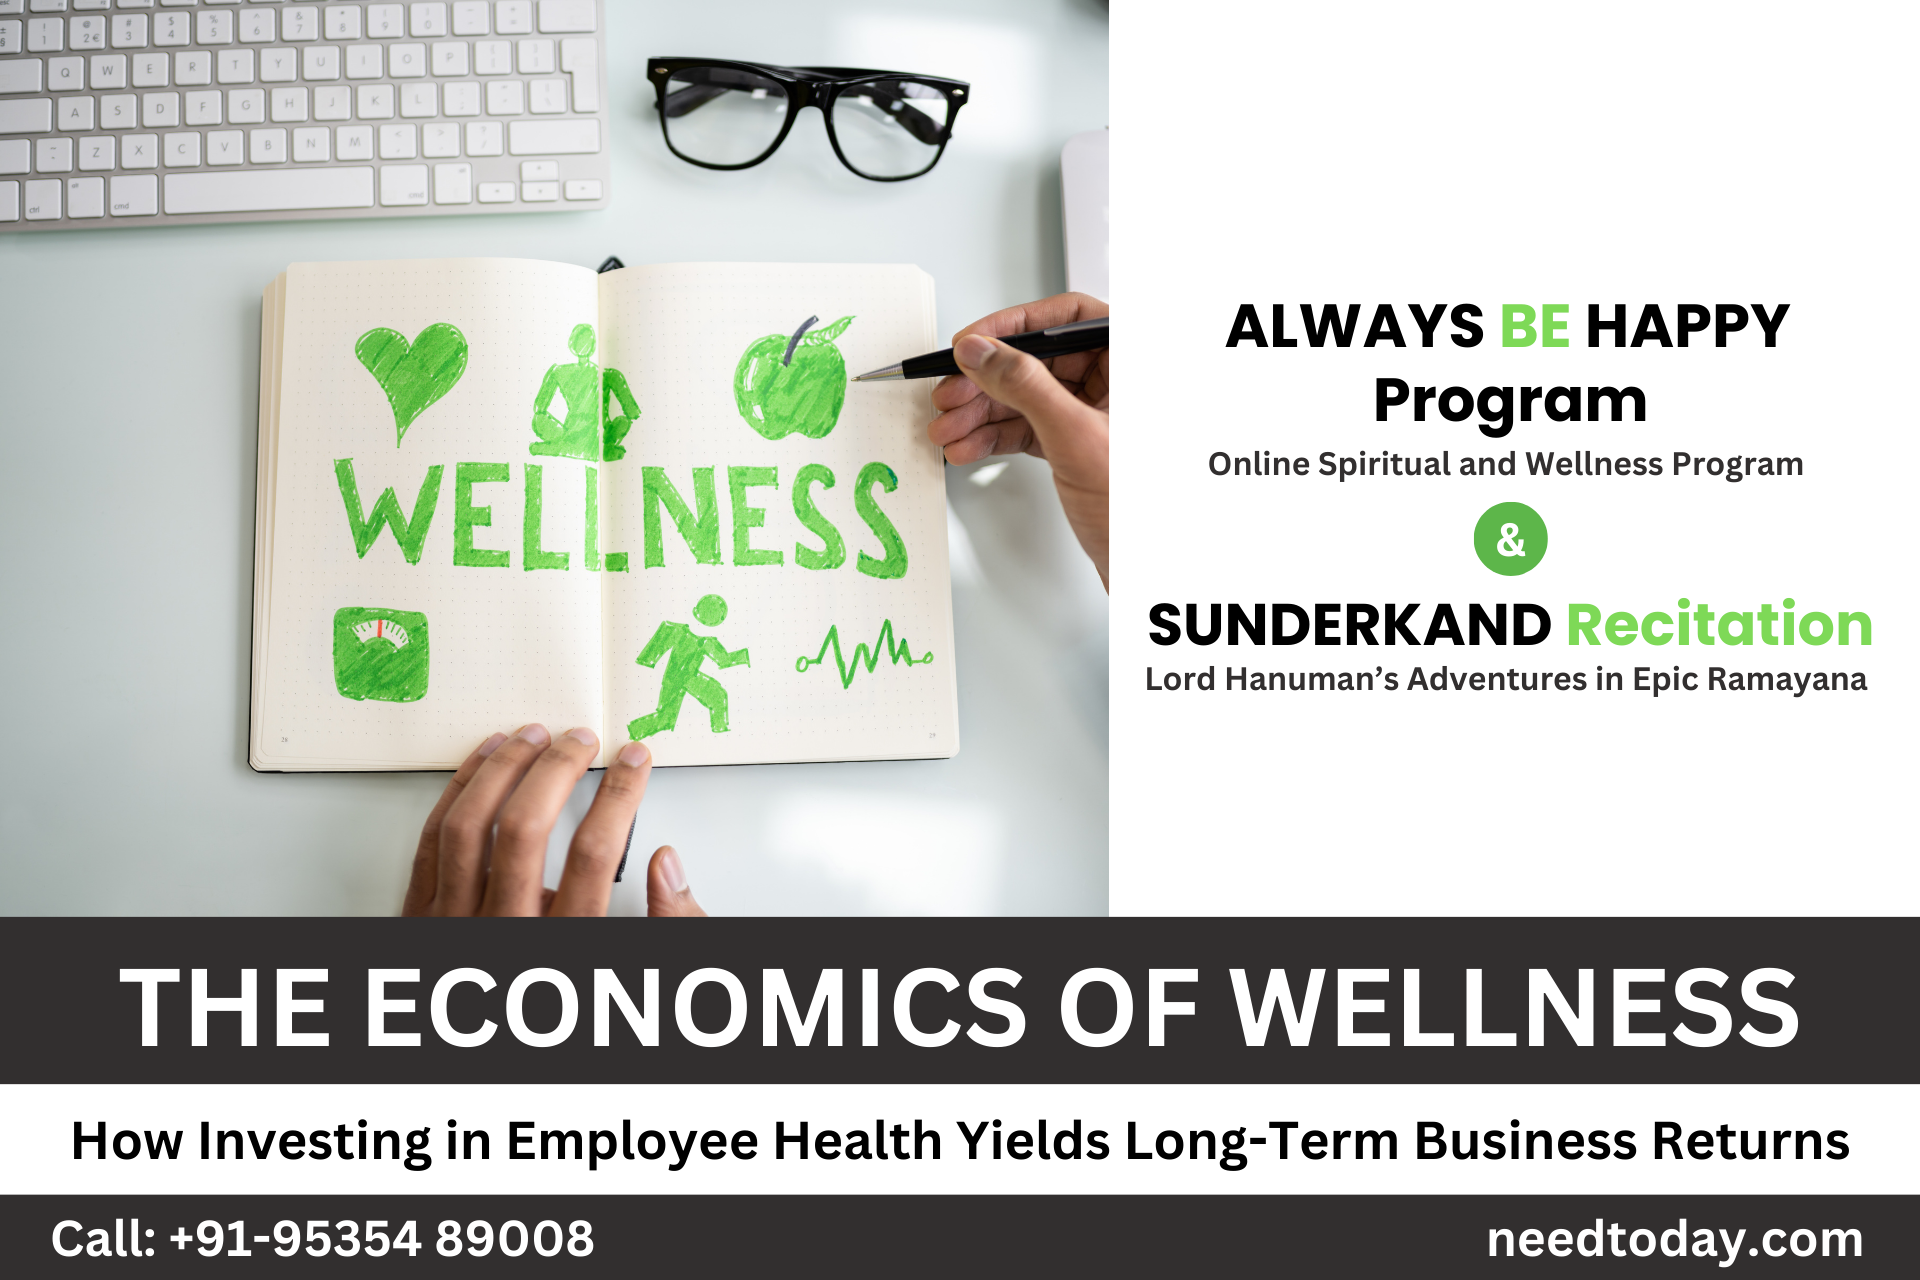 The Economics of Wellness: How Investing in Employee Health Yields Long-Term Business Returns